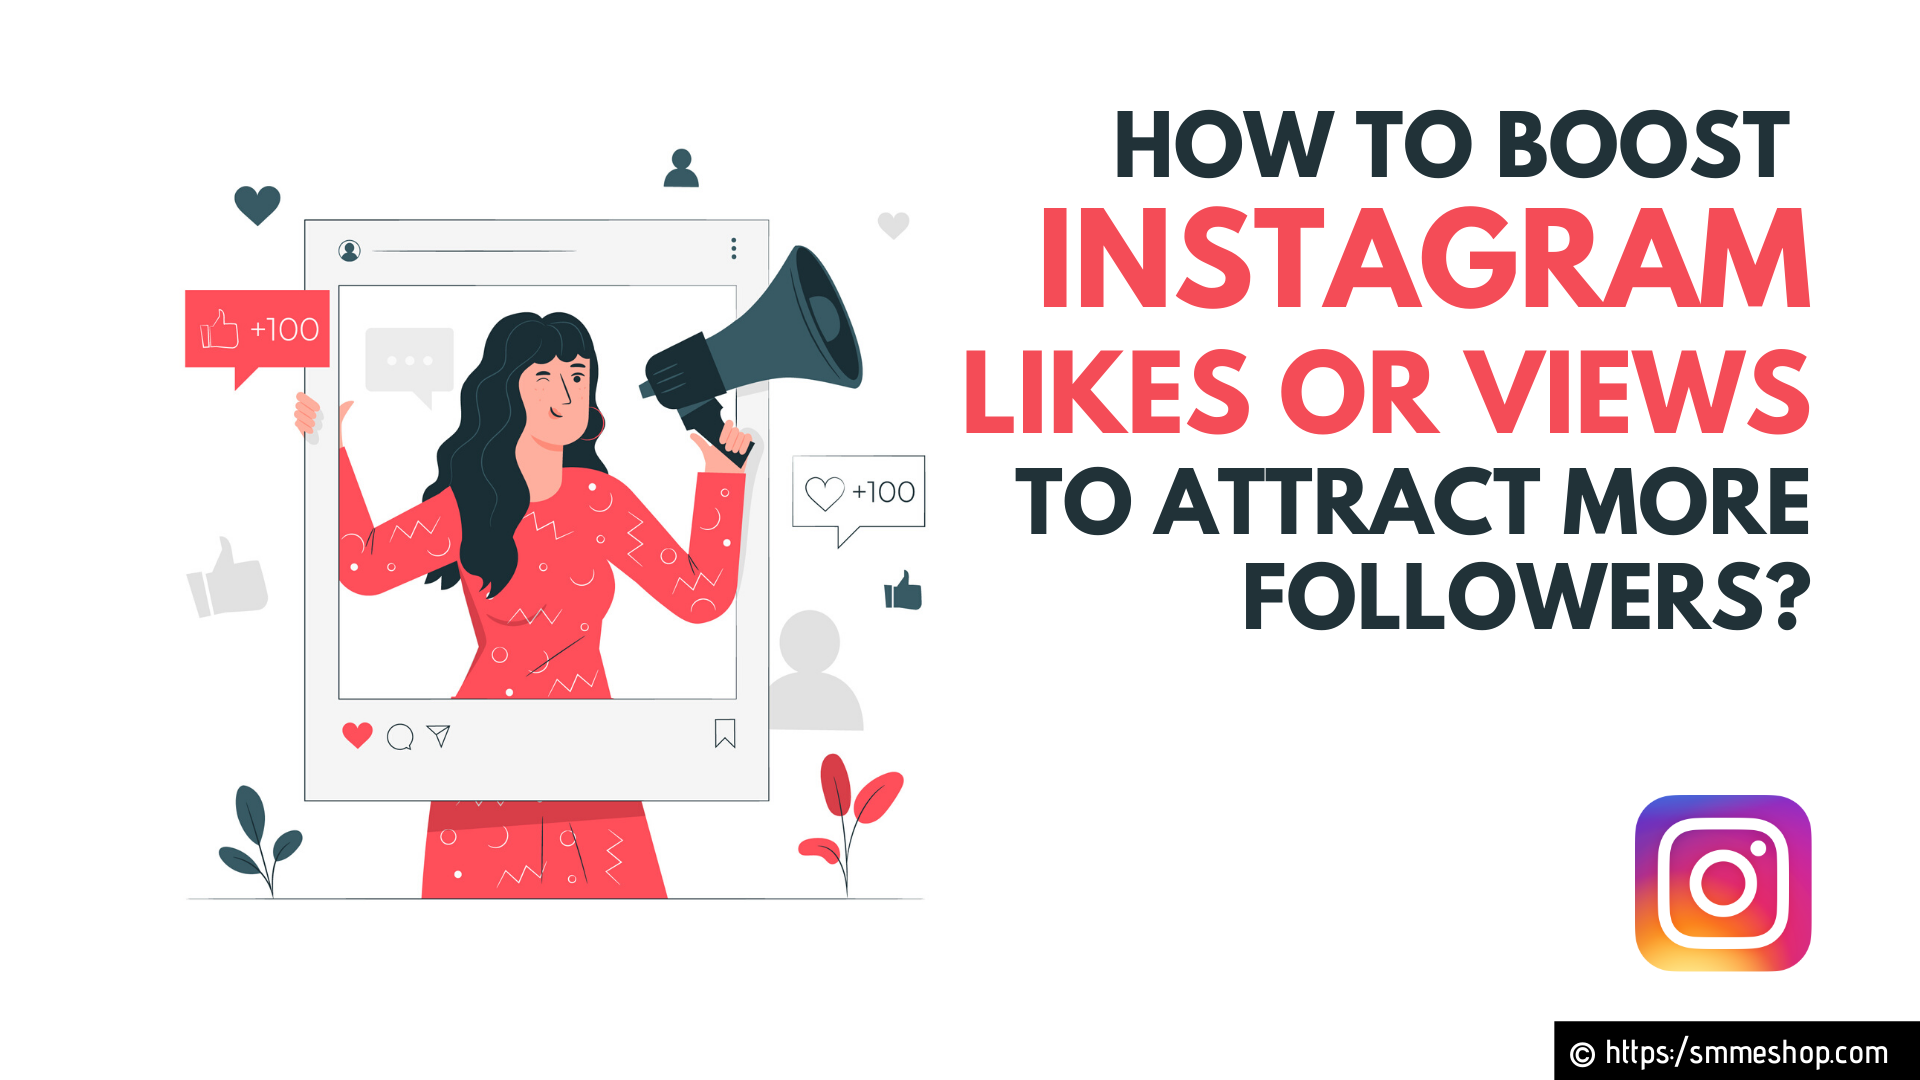 How to Boost Instagram Likes or Views to Attract More Followers?